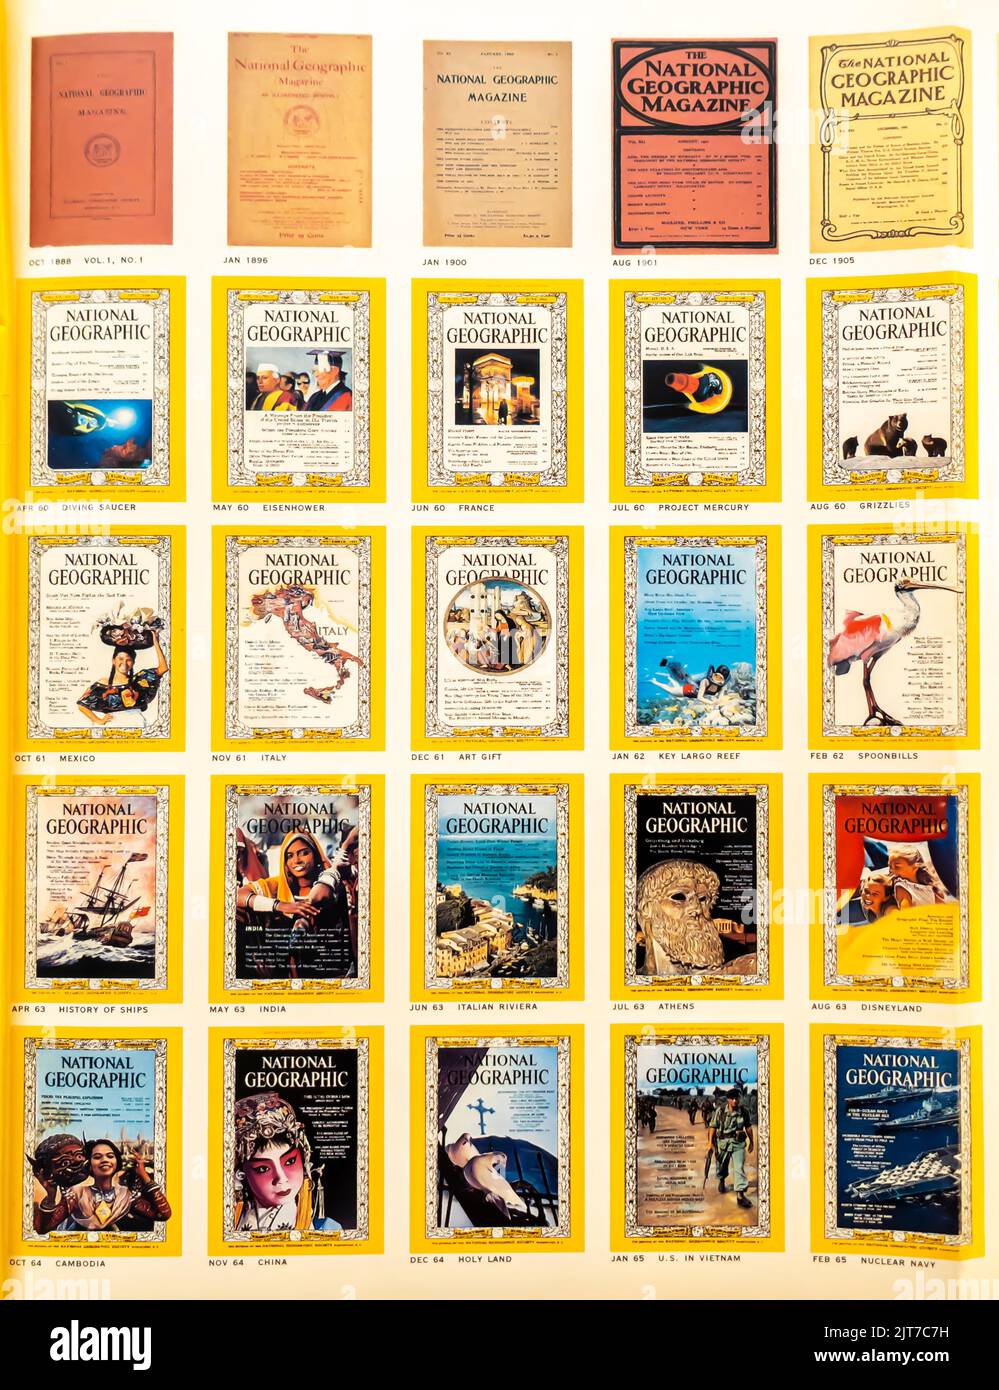 National Geographic magazines covers on a first page in a NatGeo digest collecting all editions. 1888-1965 Stock Photo